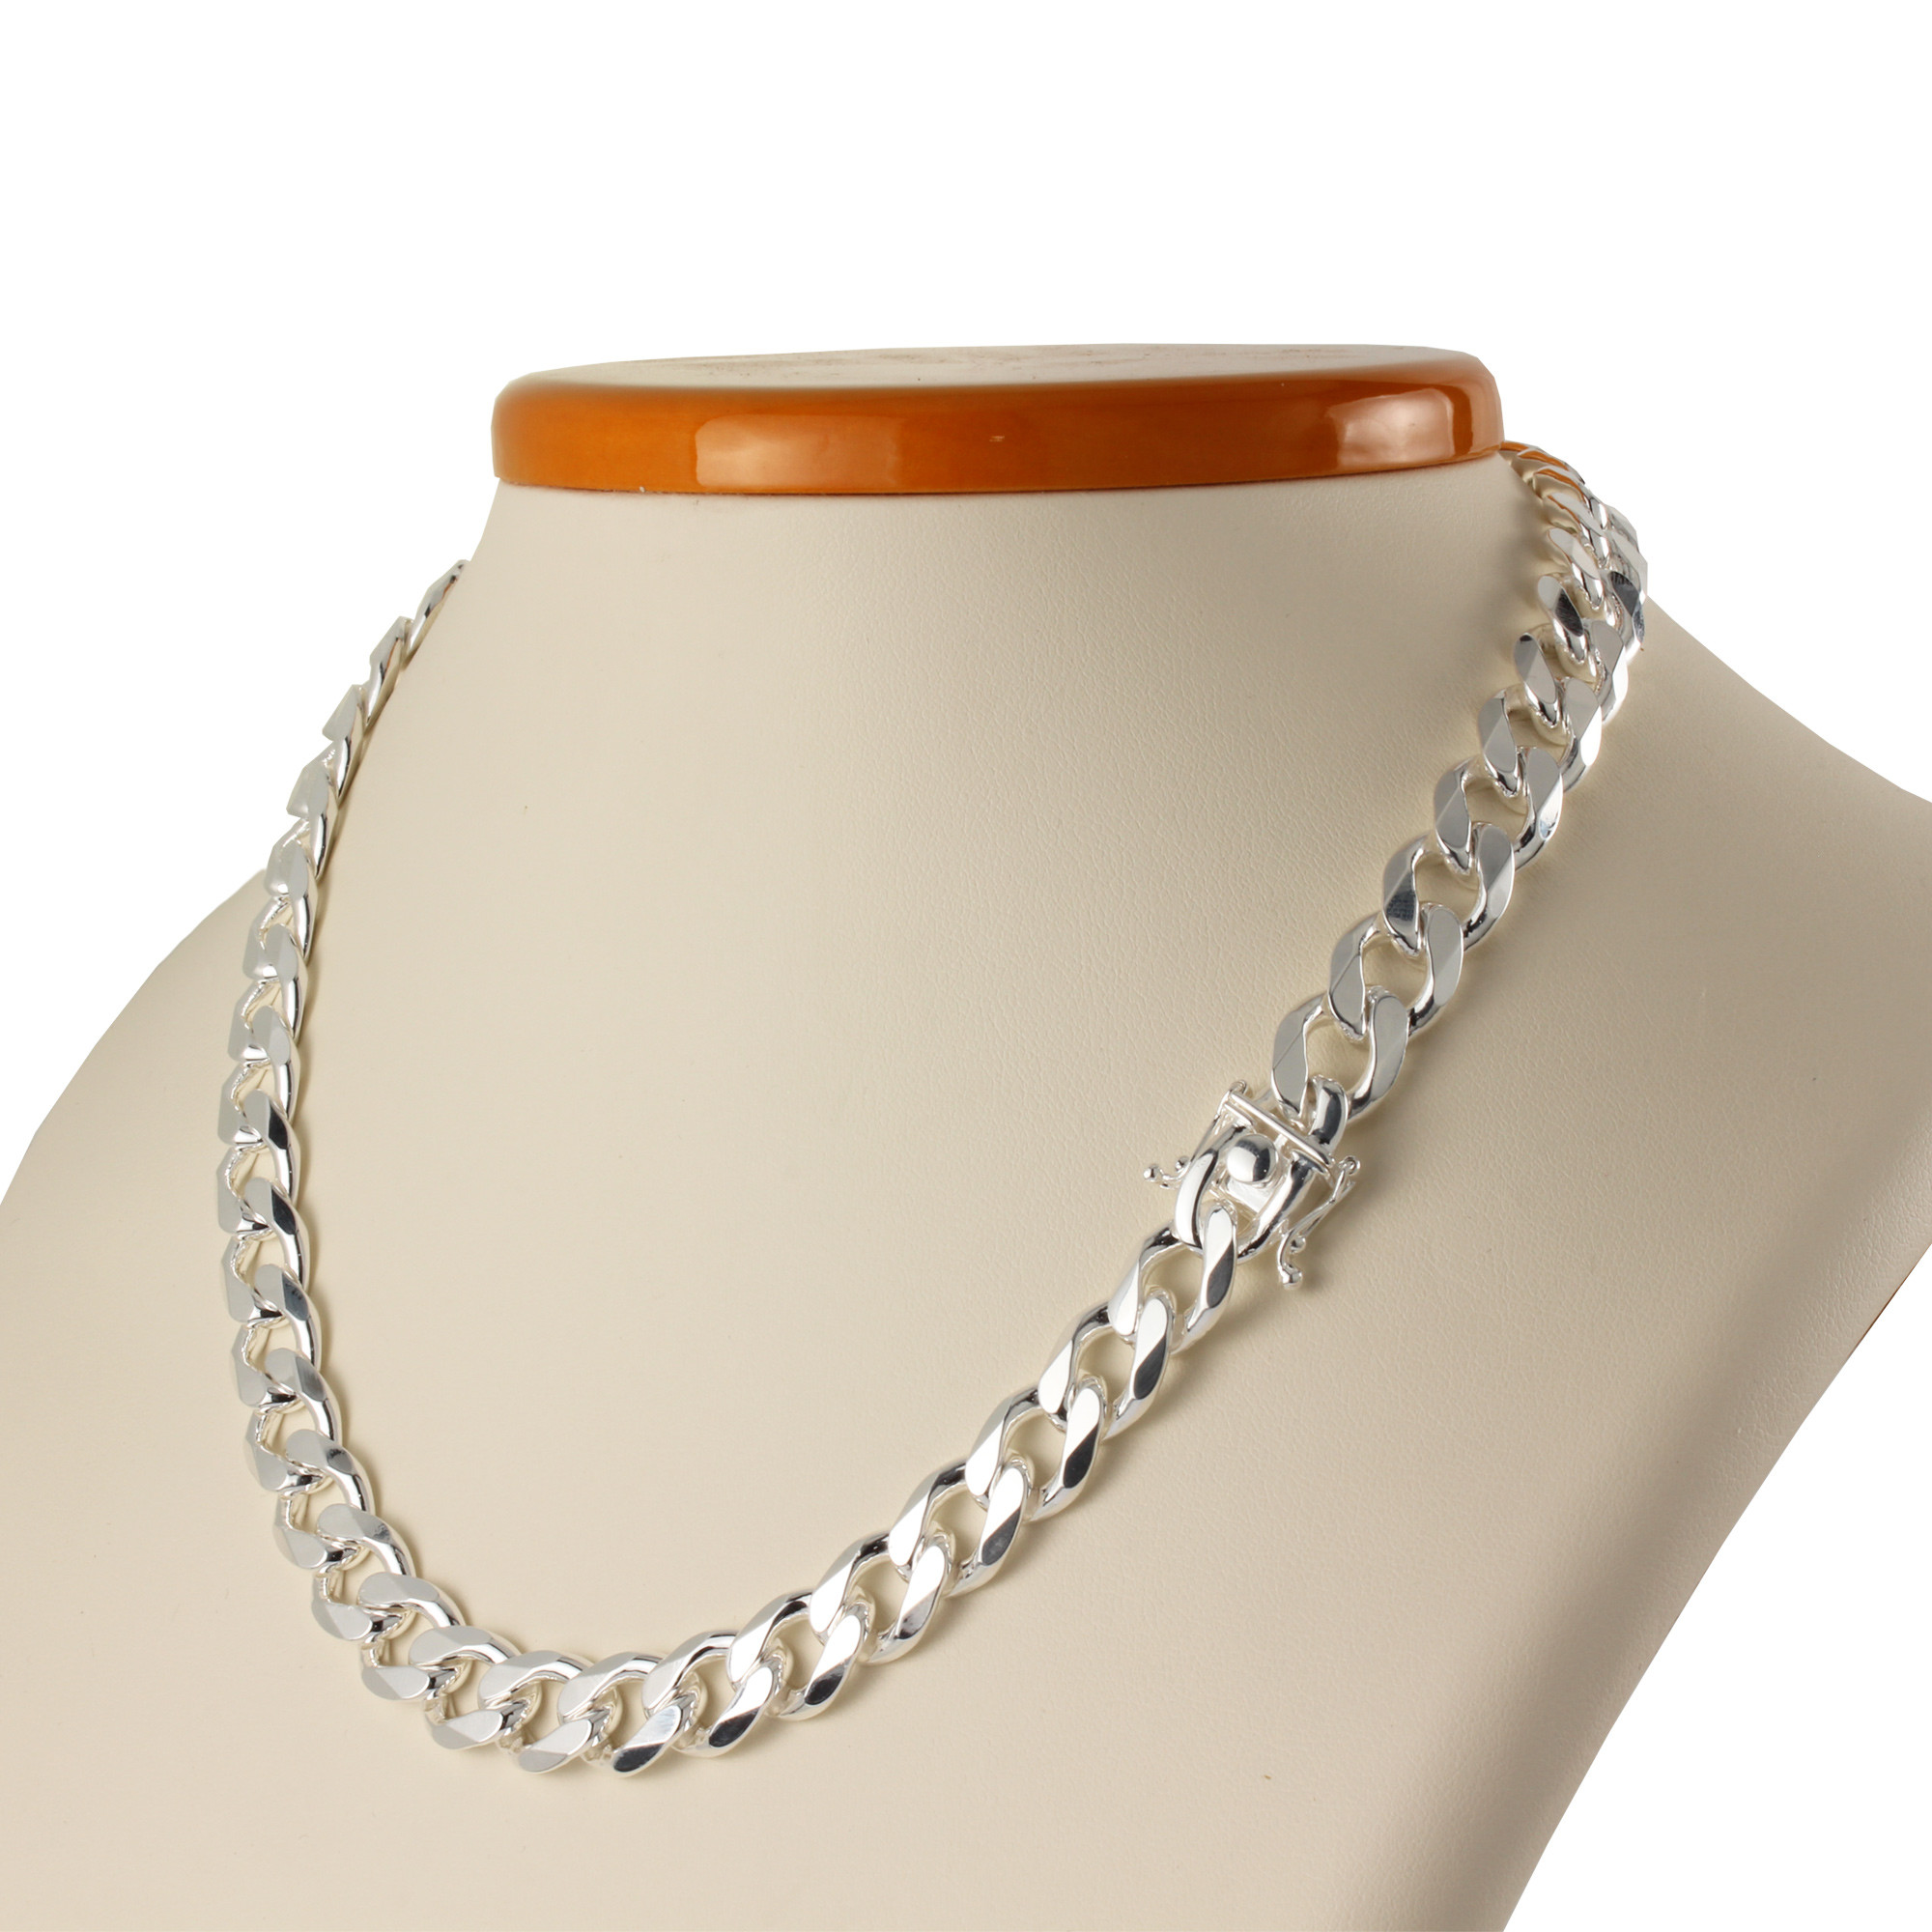 Solid 925 Sterling Silver .6mm Oval Box Chain Necklace with Secure Lobster Lock Clasp